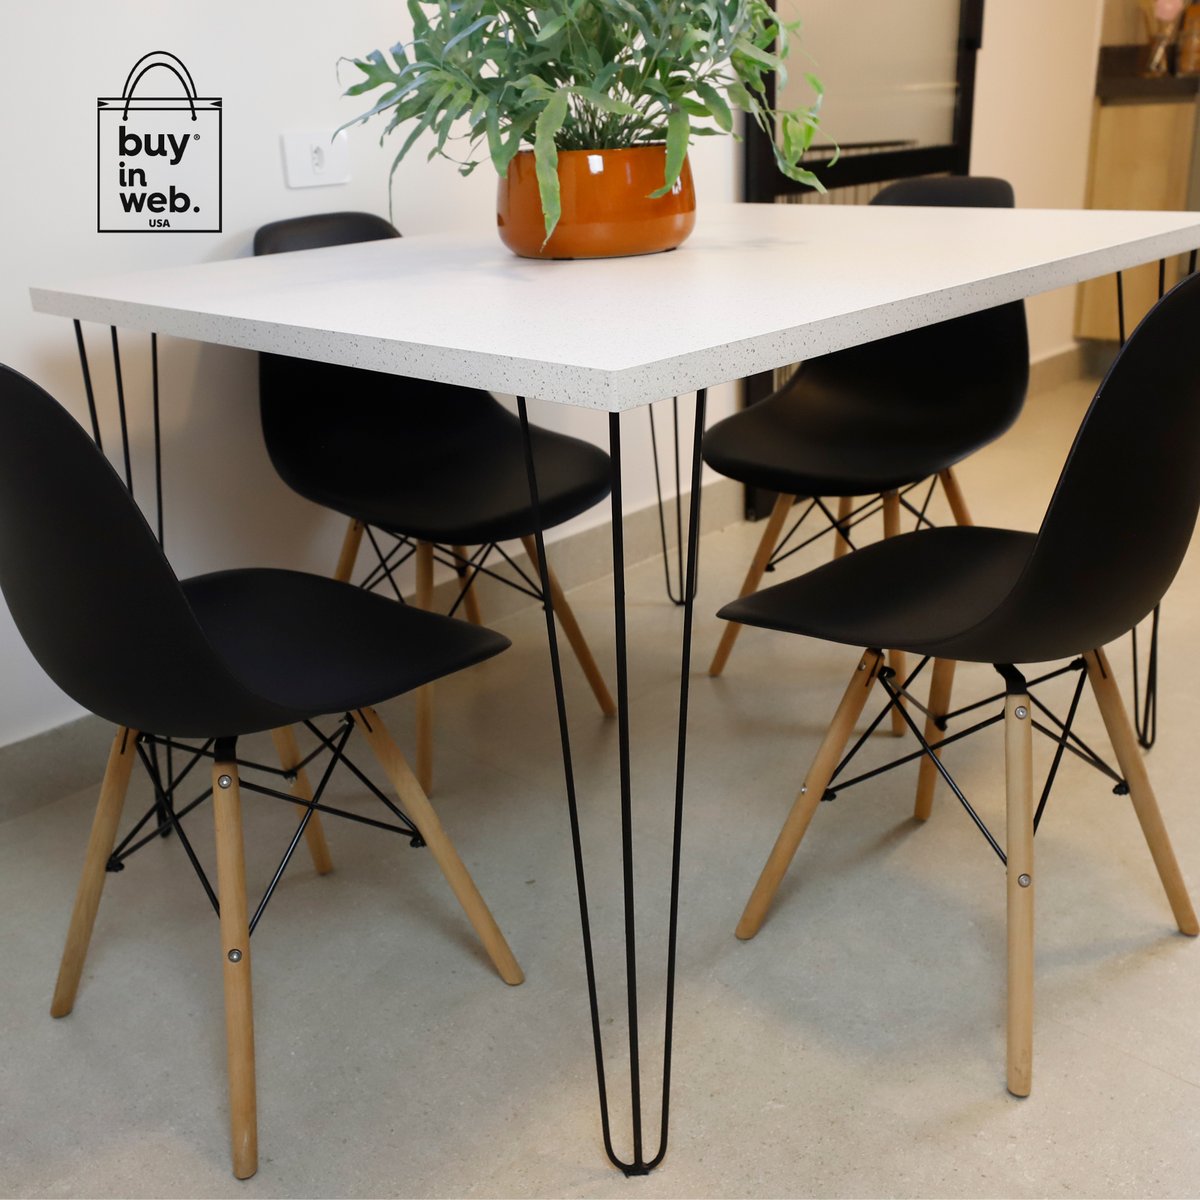 Buy in Web USA Modern Dining Chair Set, Shell Chair, Wood Legs for Kitchen, Dining, Living Room, Supports up to 330 lbs (150 kg) with X-shaped steel frame, molded ABS back #chair #buyinwebusa #modernchair #diningchair #shellchair #woodlegs #kitchenchair